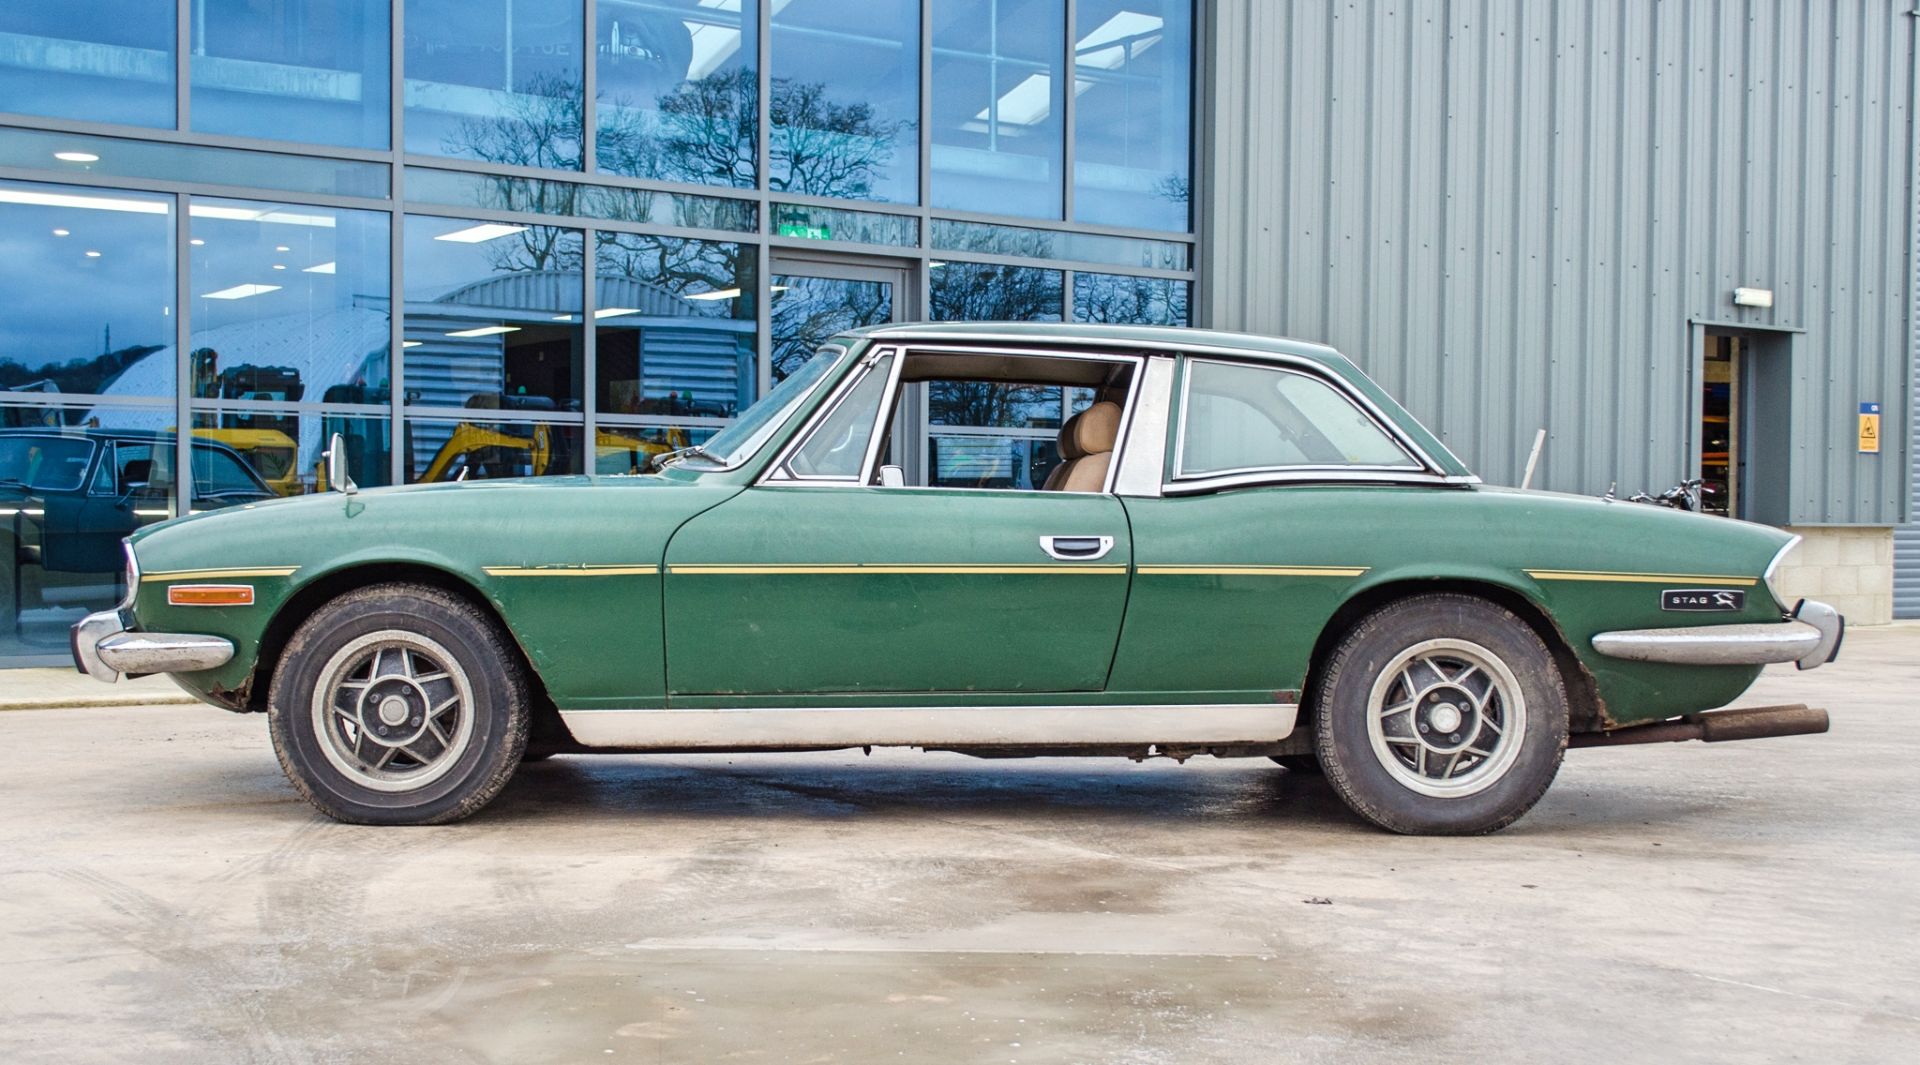 1978 Triumph Stag 3 litre manual 2 door convertible Barn Find - Image 13 of 57